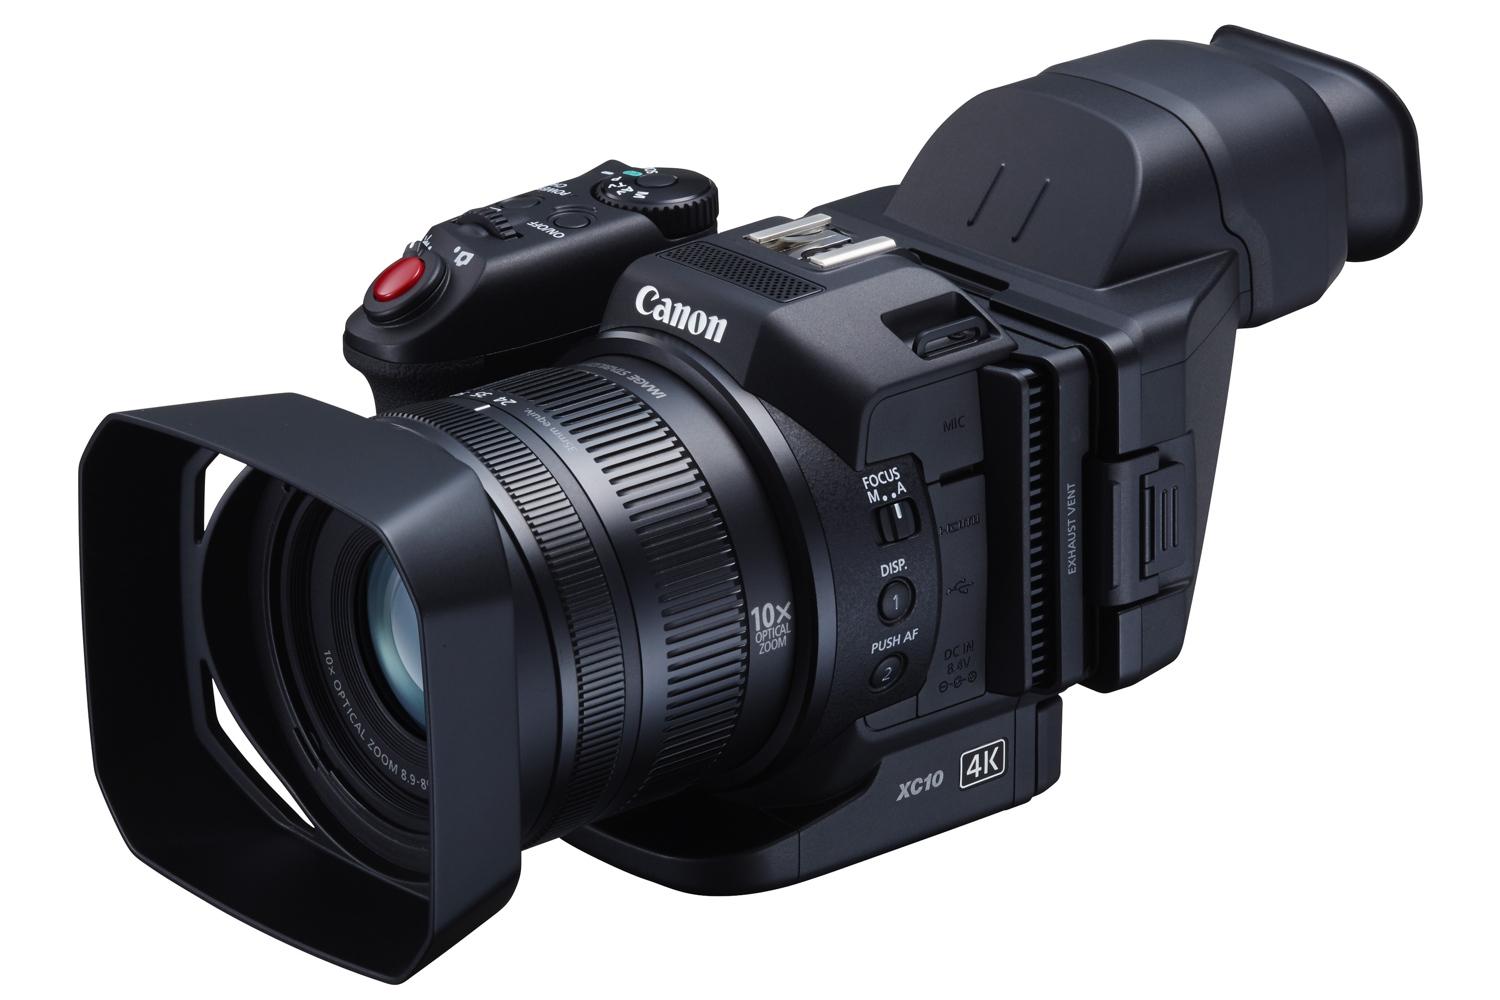 canons new affordable 4k camcorder ideal for budding filmmakers youtube creators canon xc10 4